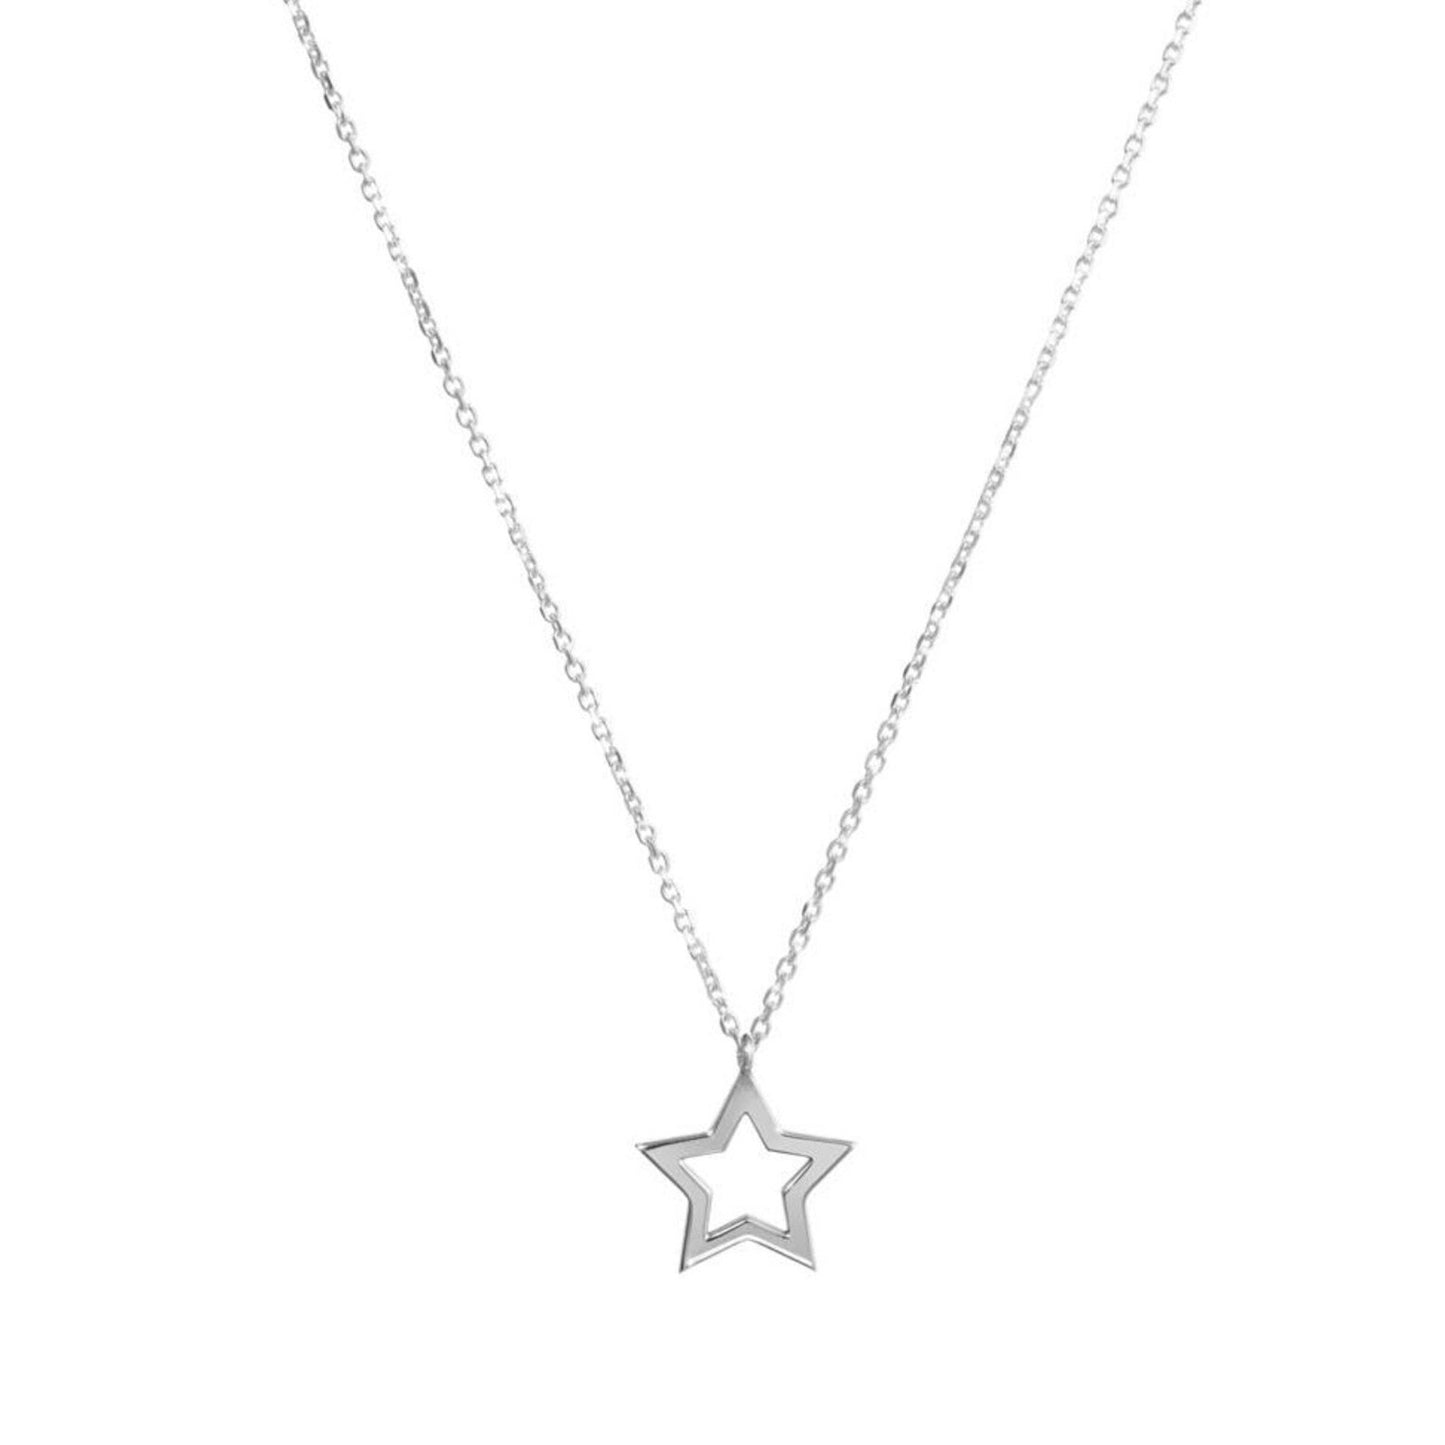 Dazzle in celestial splendor with our 18 carat gold tiny star necklace. A radiant ode to Arabian nights, encapsulating the magic of star-studded skies.